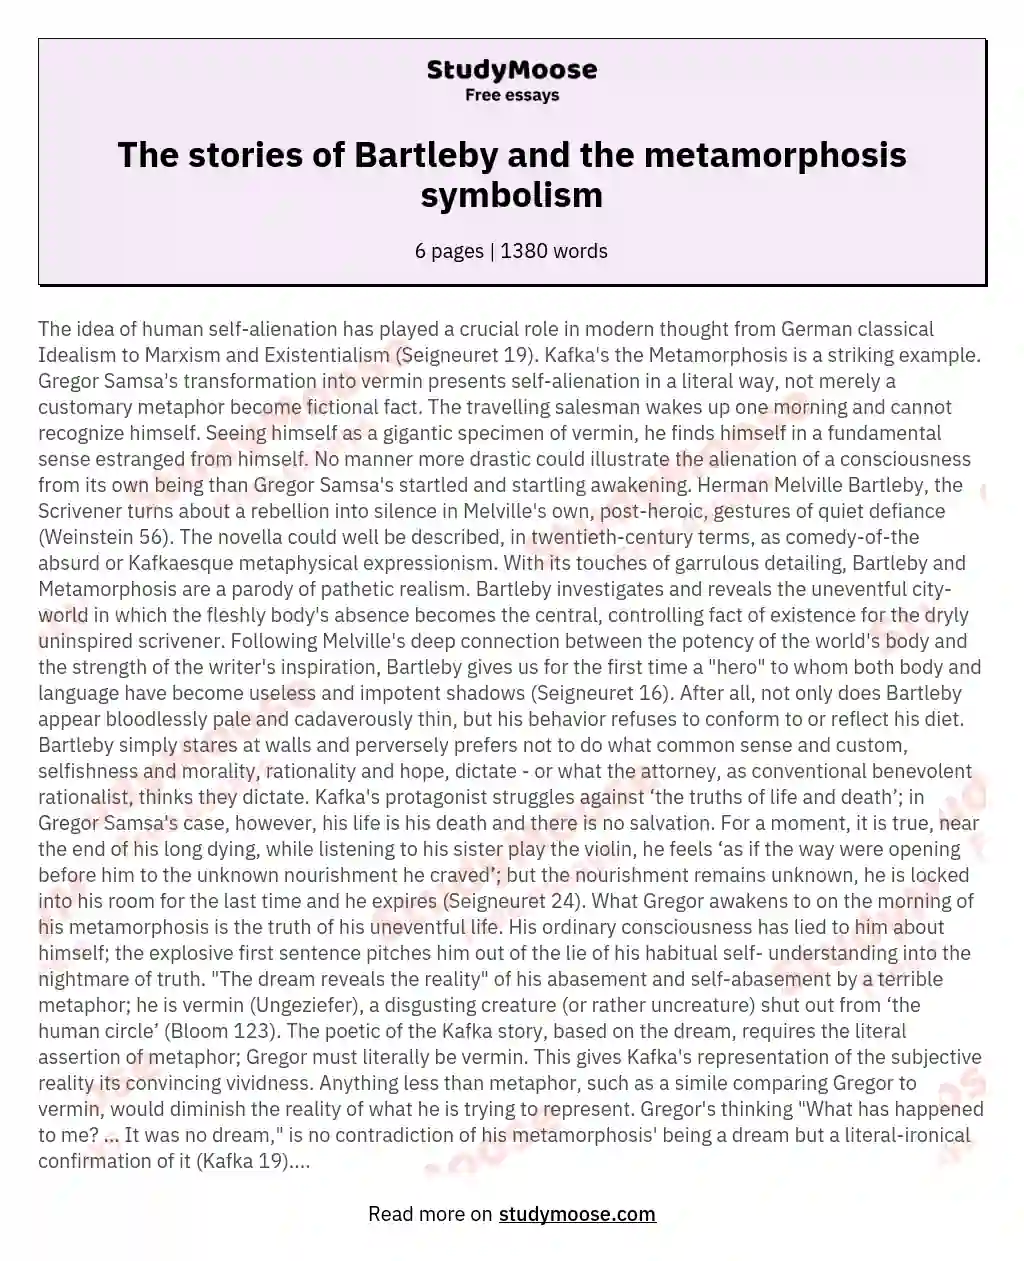 The stories of Bartleby and the metamorphosis symbolism essay